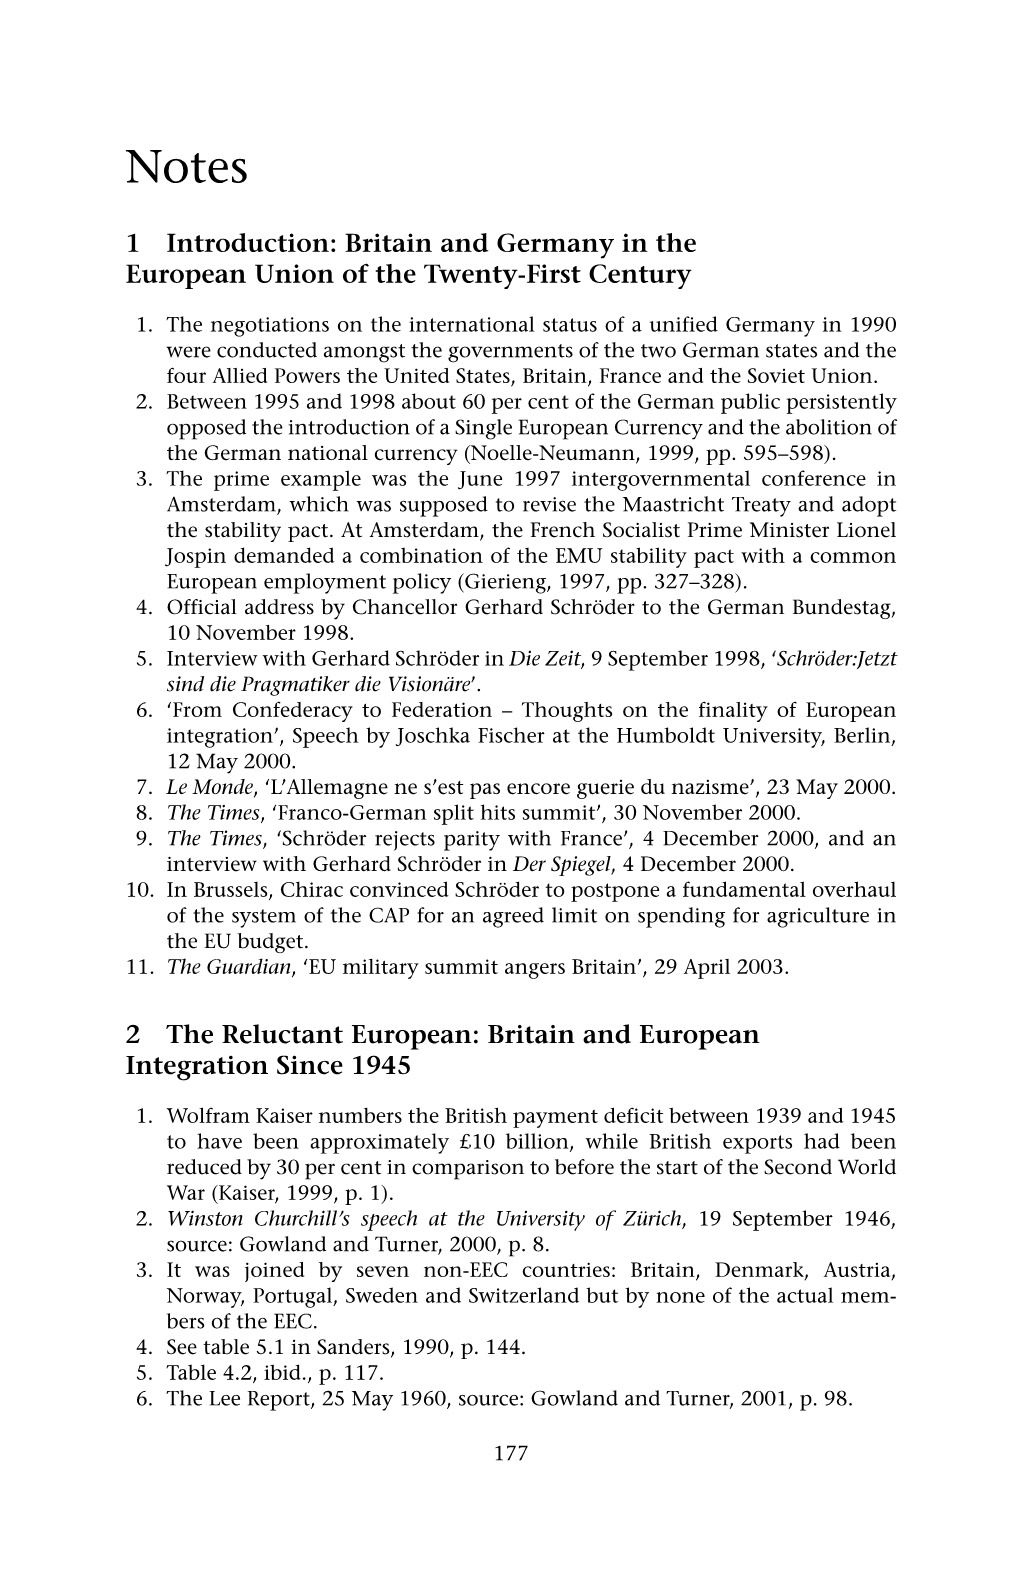 1 Introduction: Britain and Germany in the European Union of the Twenty-First Century